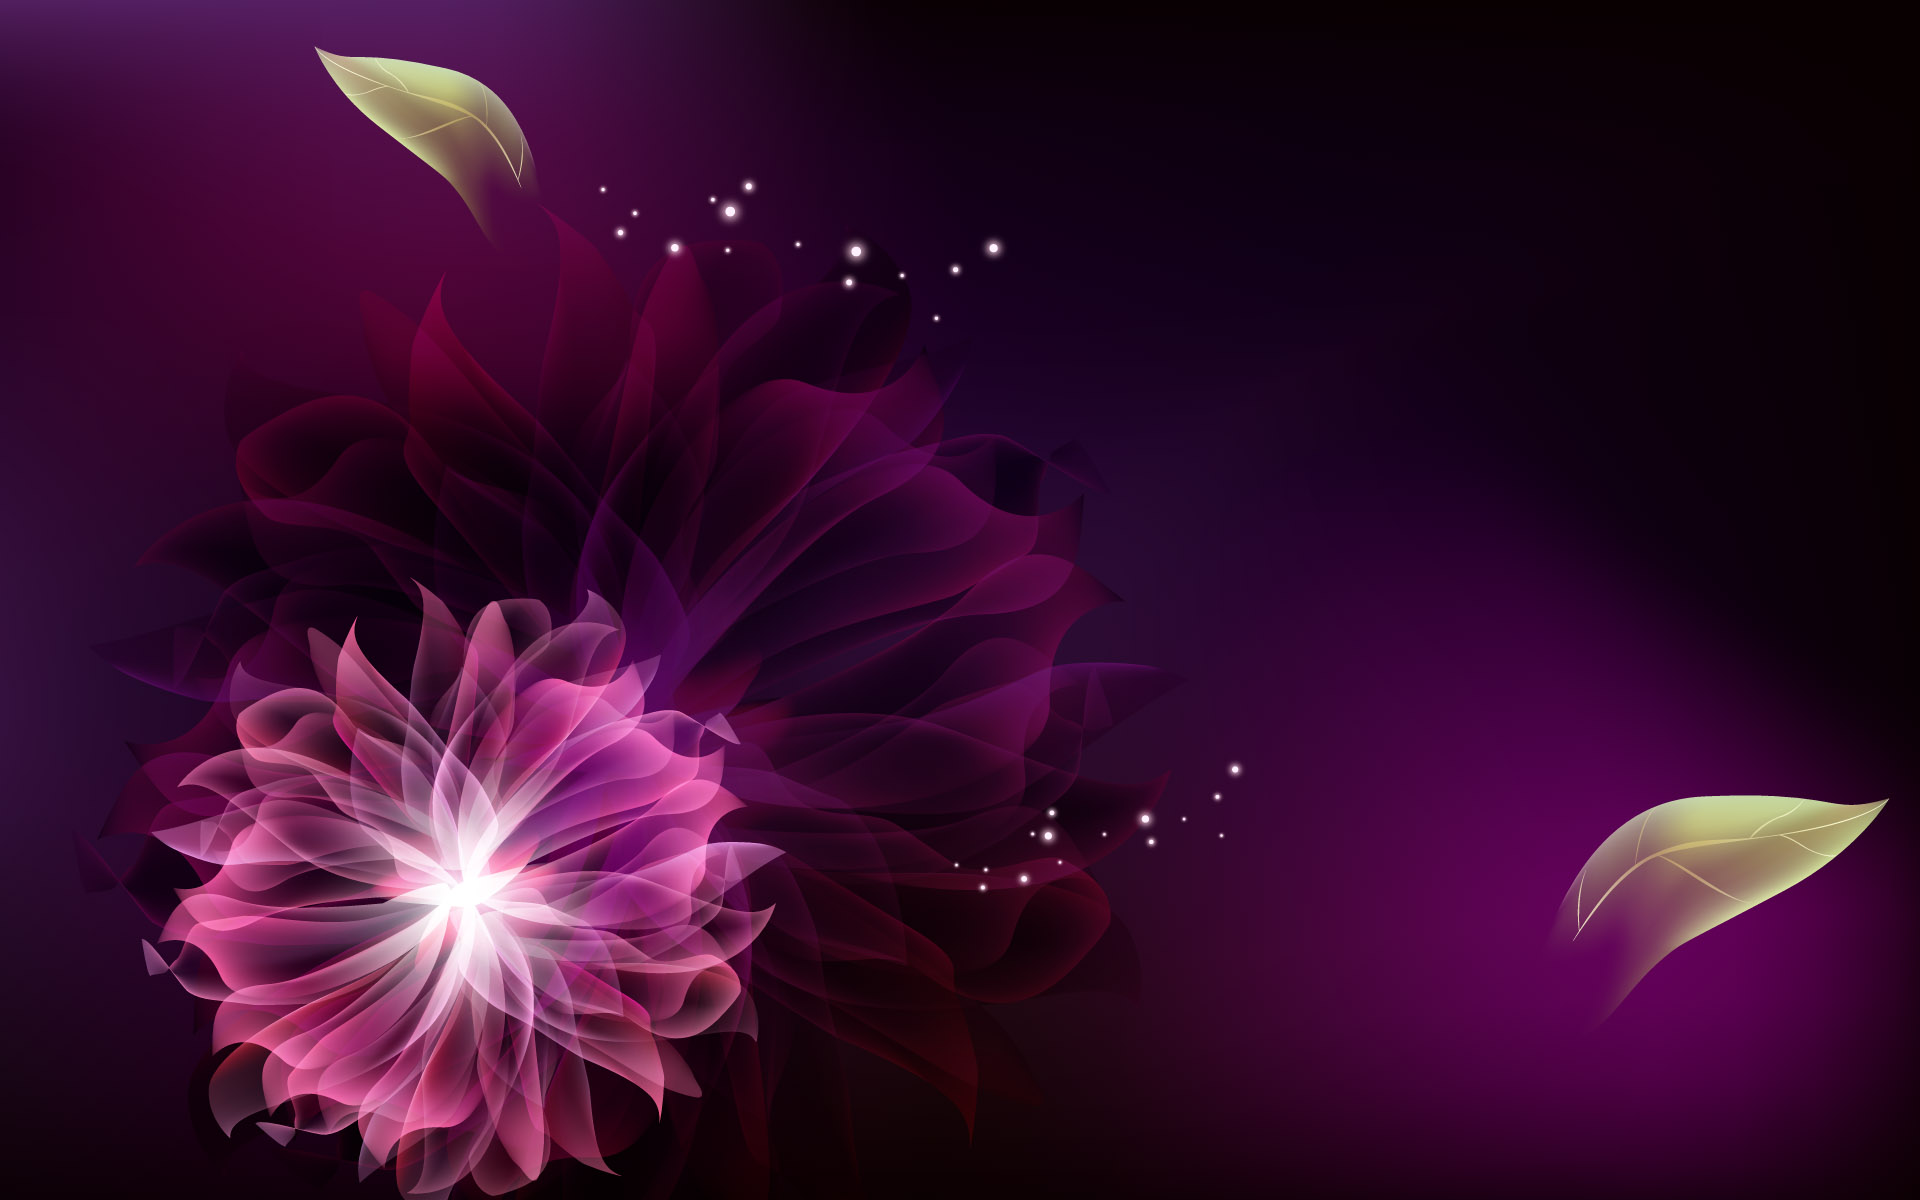 wallpaper hd flowers abstract